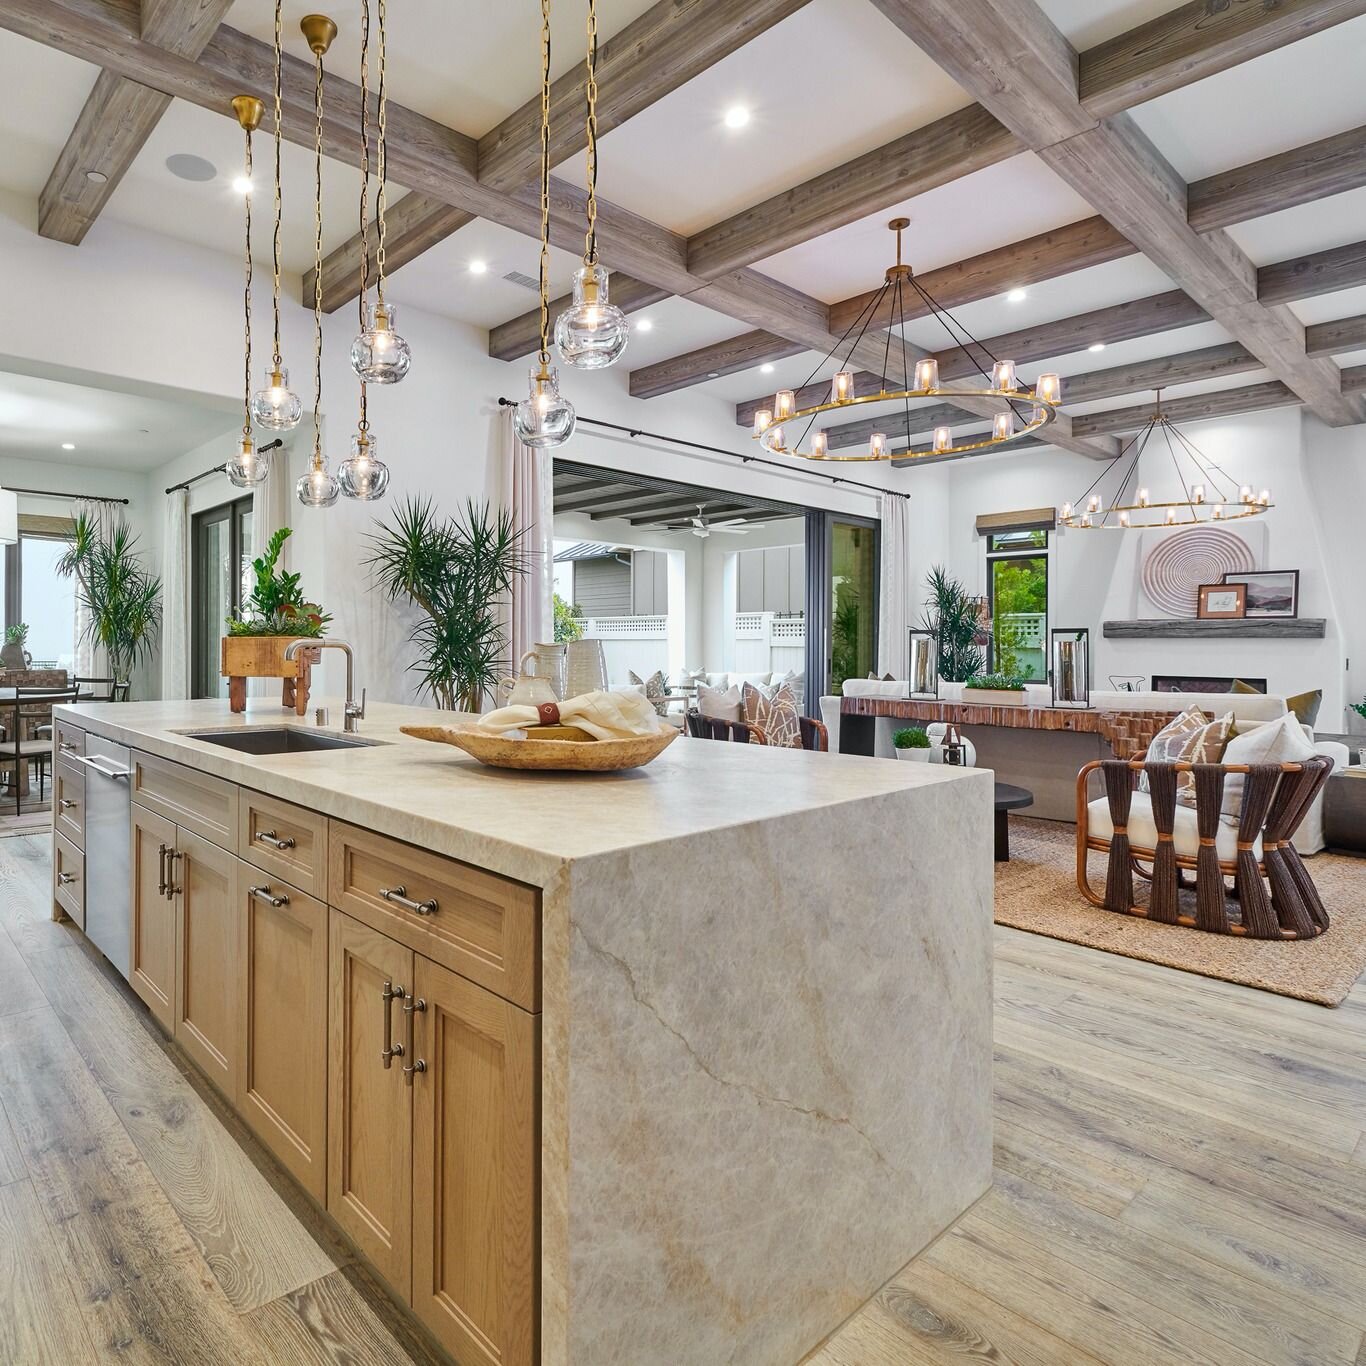 Incorporating natural elements into your space from rustic woods and beautiful porcelains helps  elevate a space. 

Luxury Model home in Rolling Hills, CA 📍

#waterfalledge #waterfallisland #waterfallcounter #kitchenisland #kitchendecor #kitchendesi